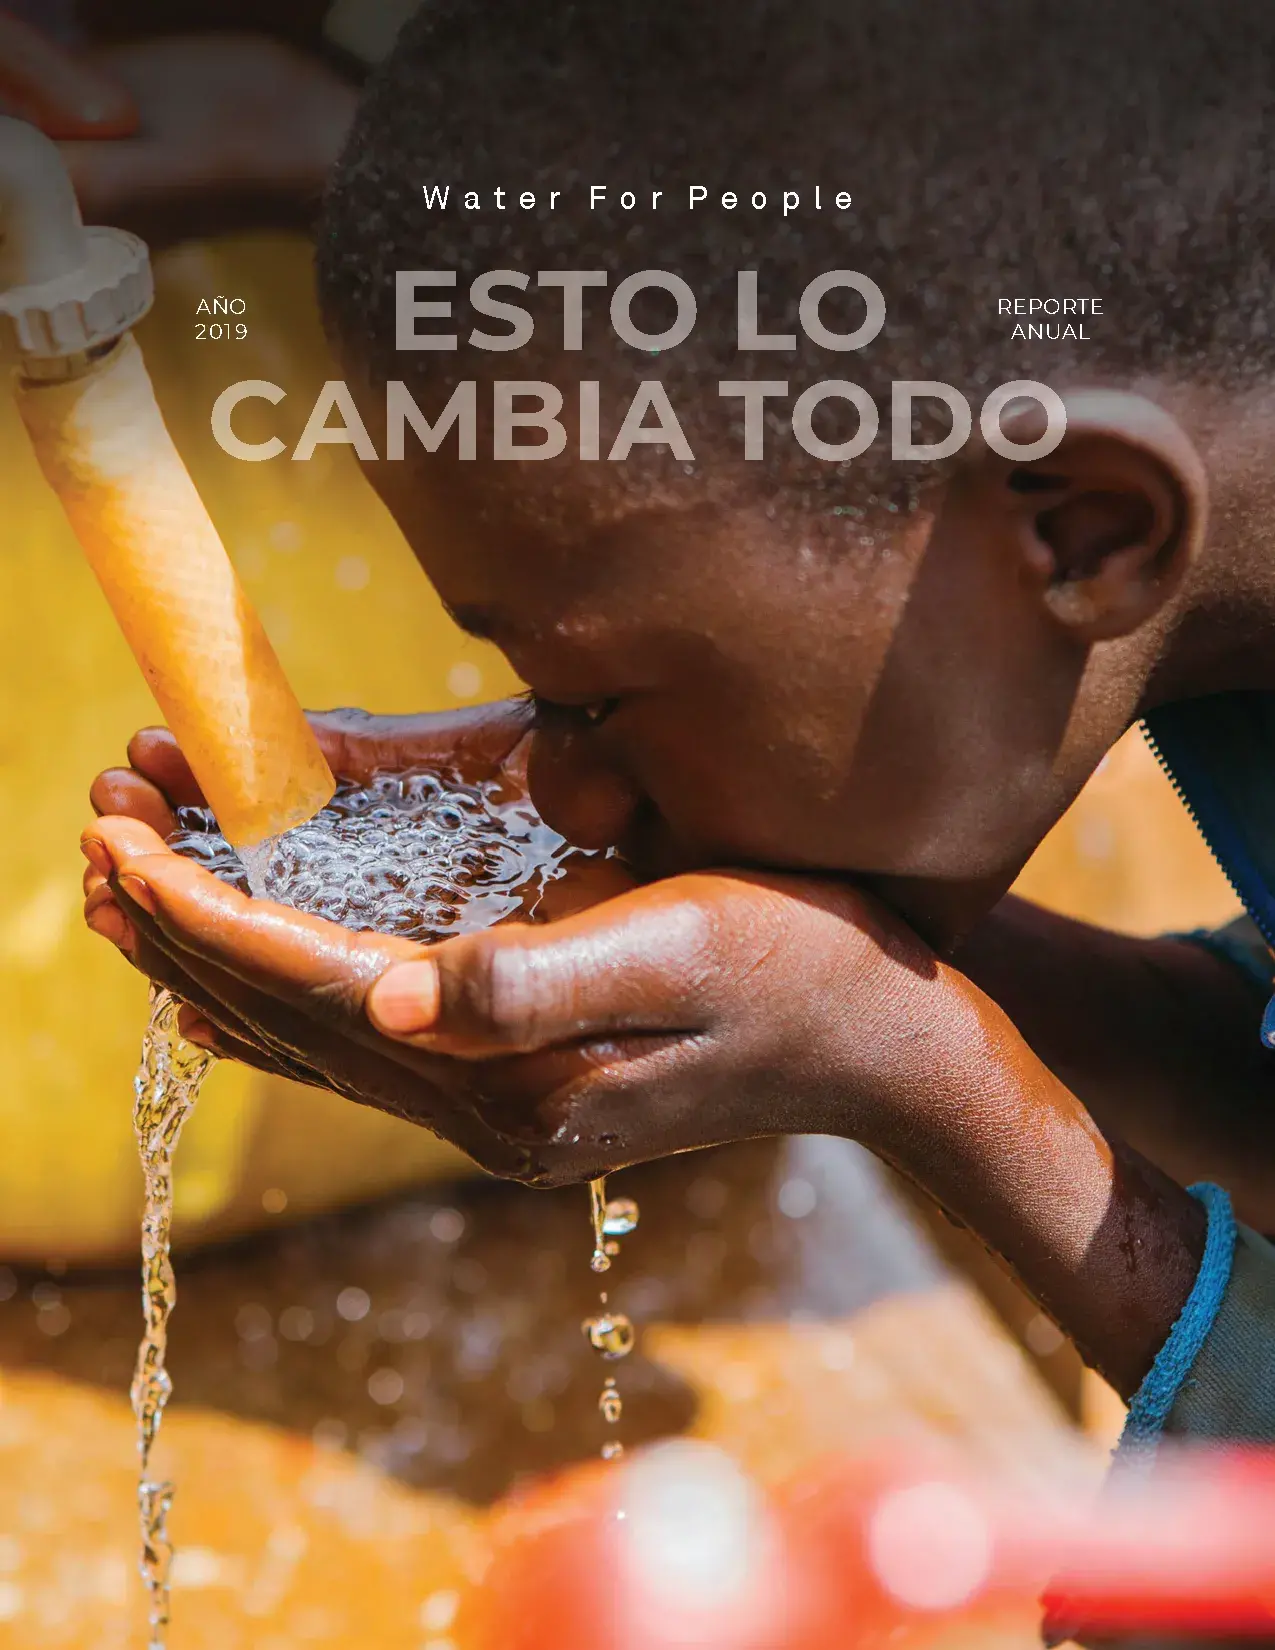 Reporte anual water for people